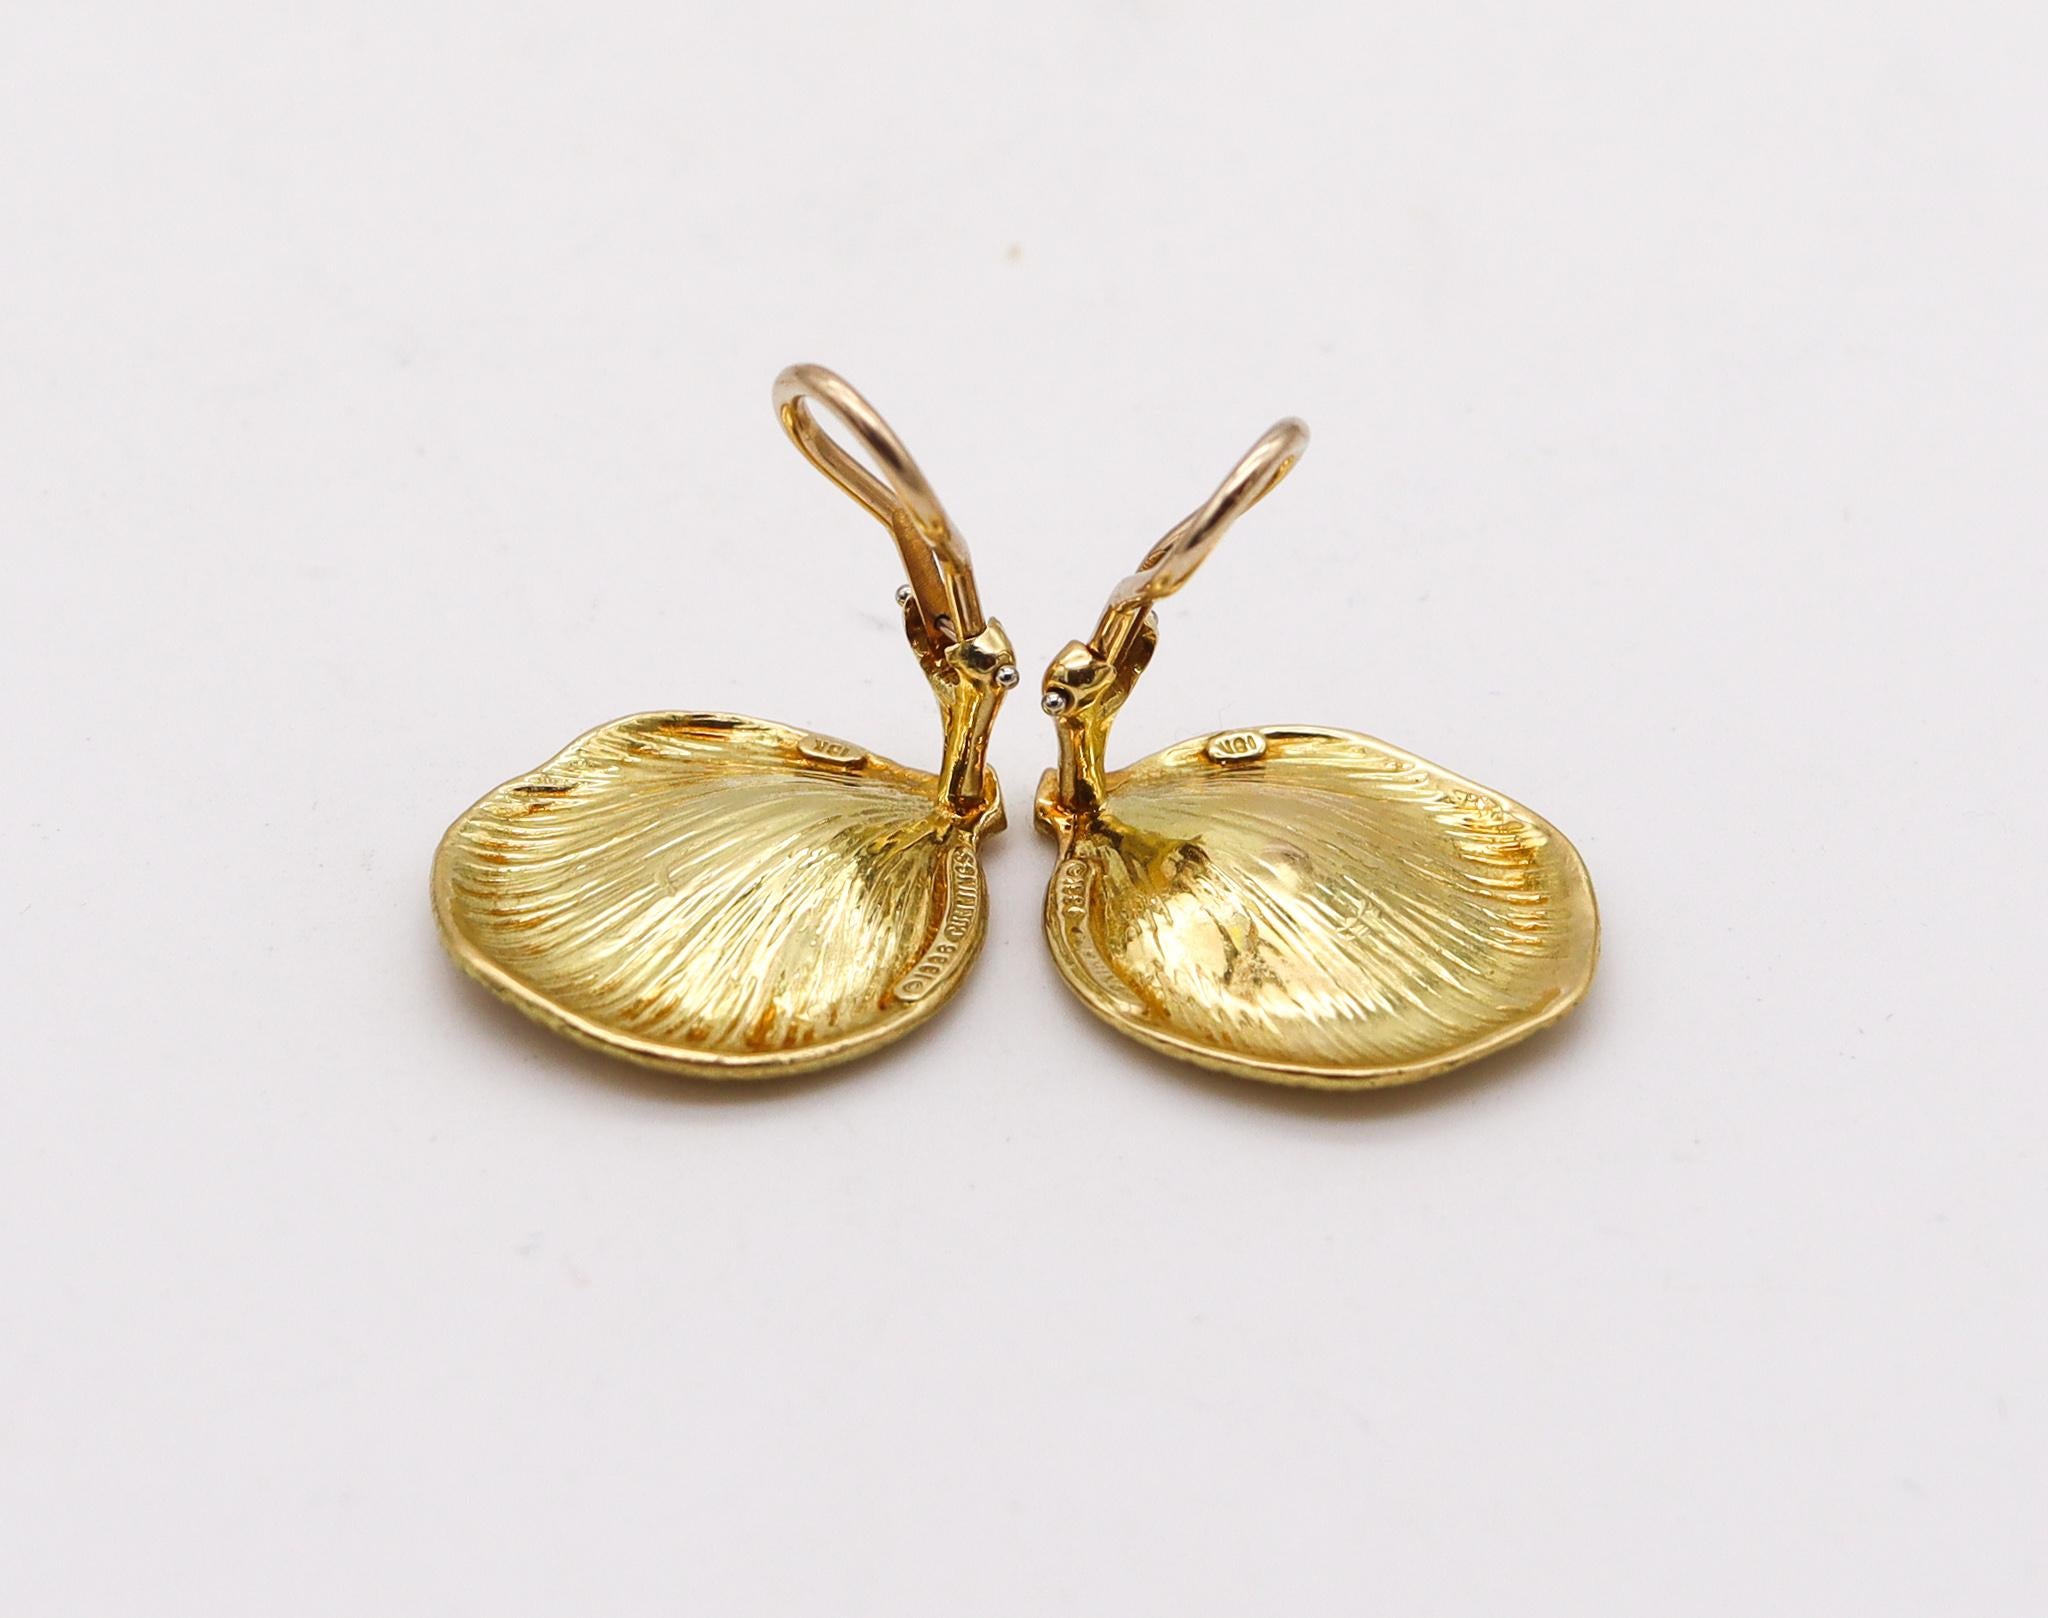 Modernist Angela Cummings Studio 1993 Textured Petals Earrings in Solid 18kt Yellow Gold For Sale